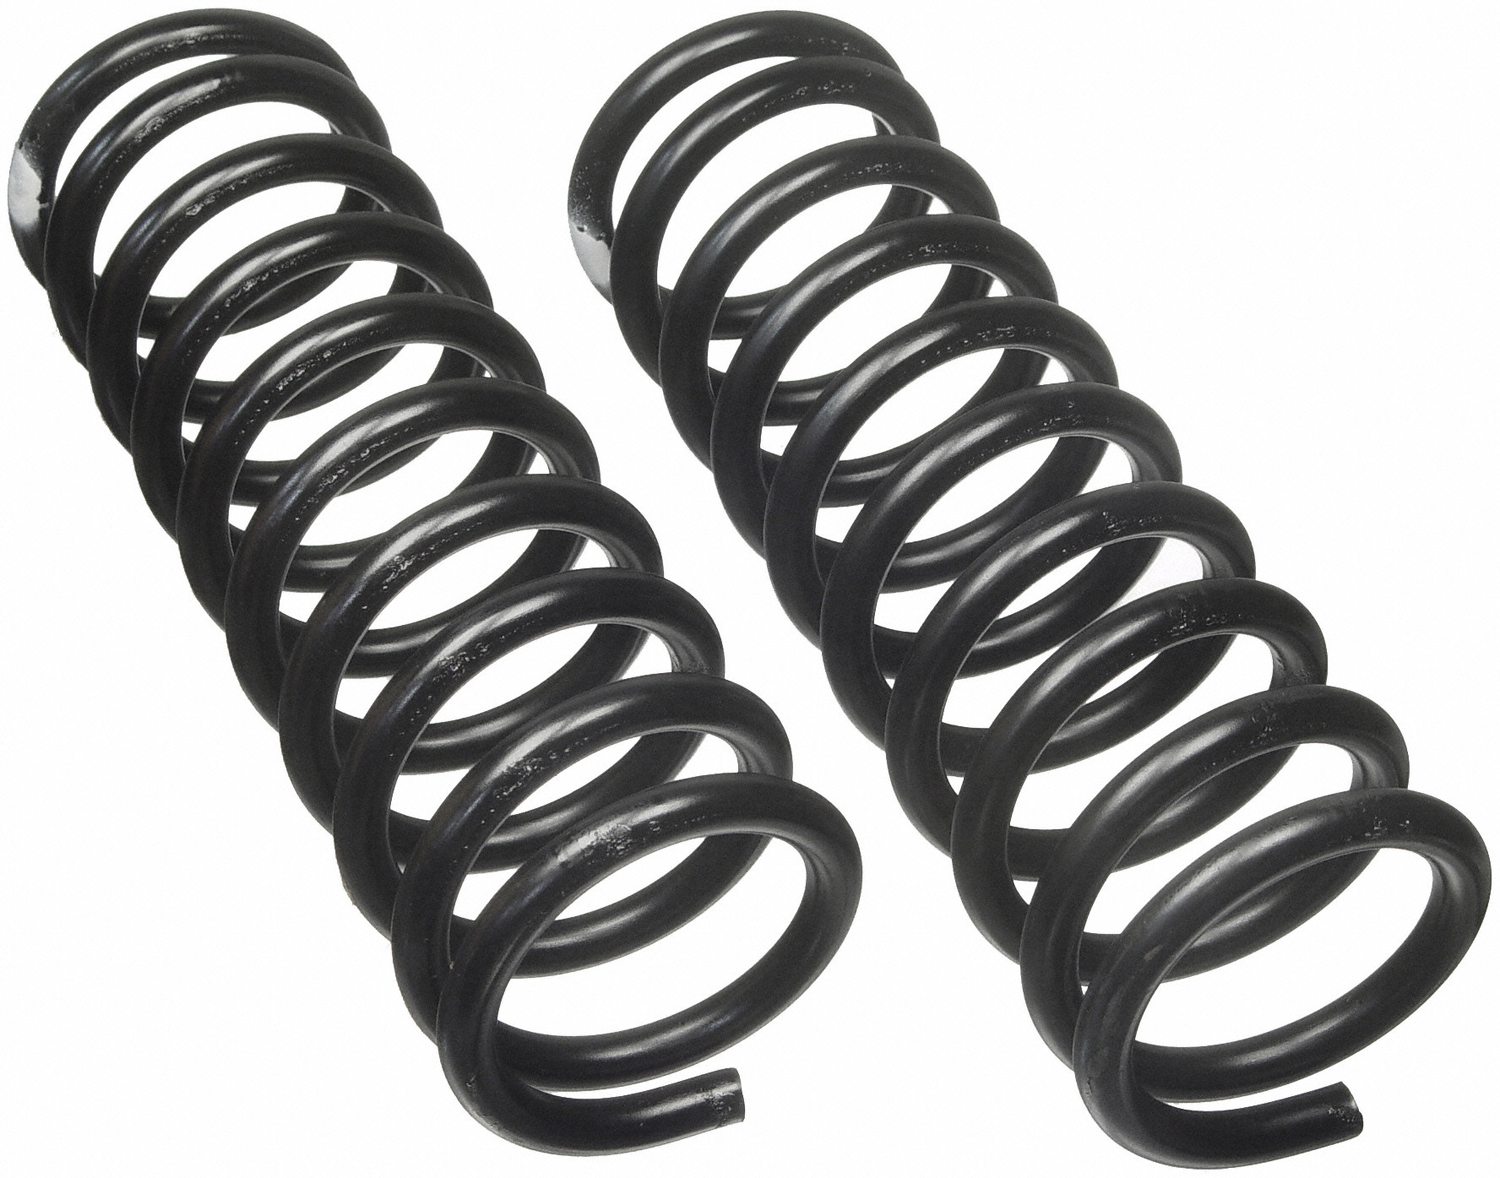 Image of ID 5044 Moog 5044 Coil Spring Set Fits 1984-1985 Buick LeSabre